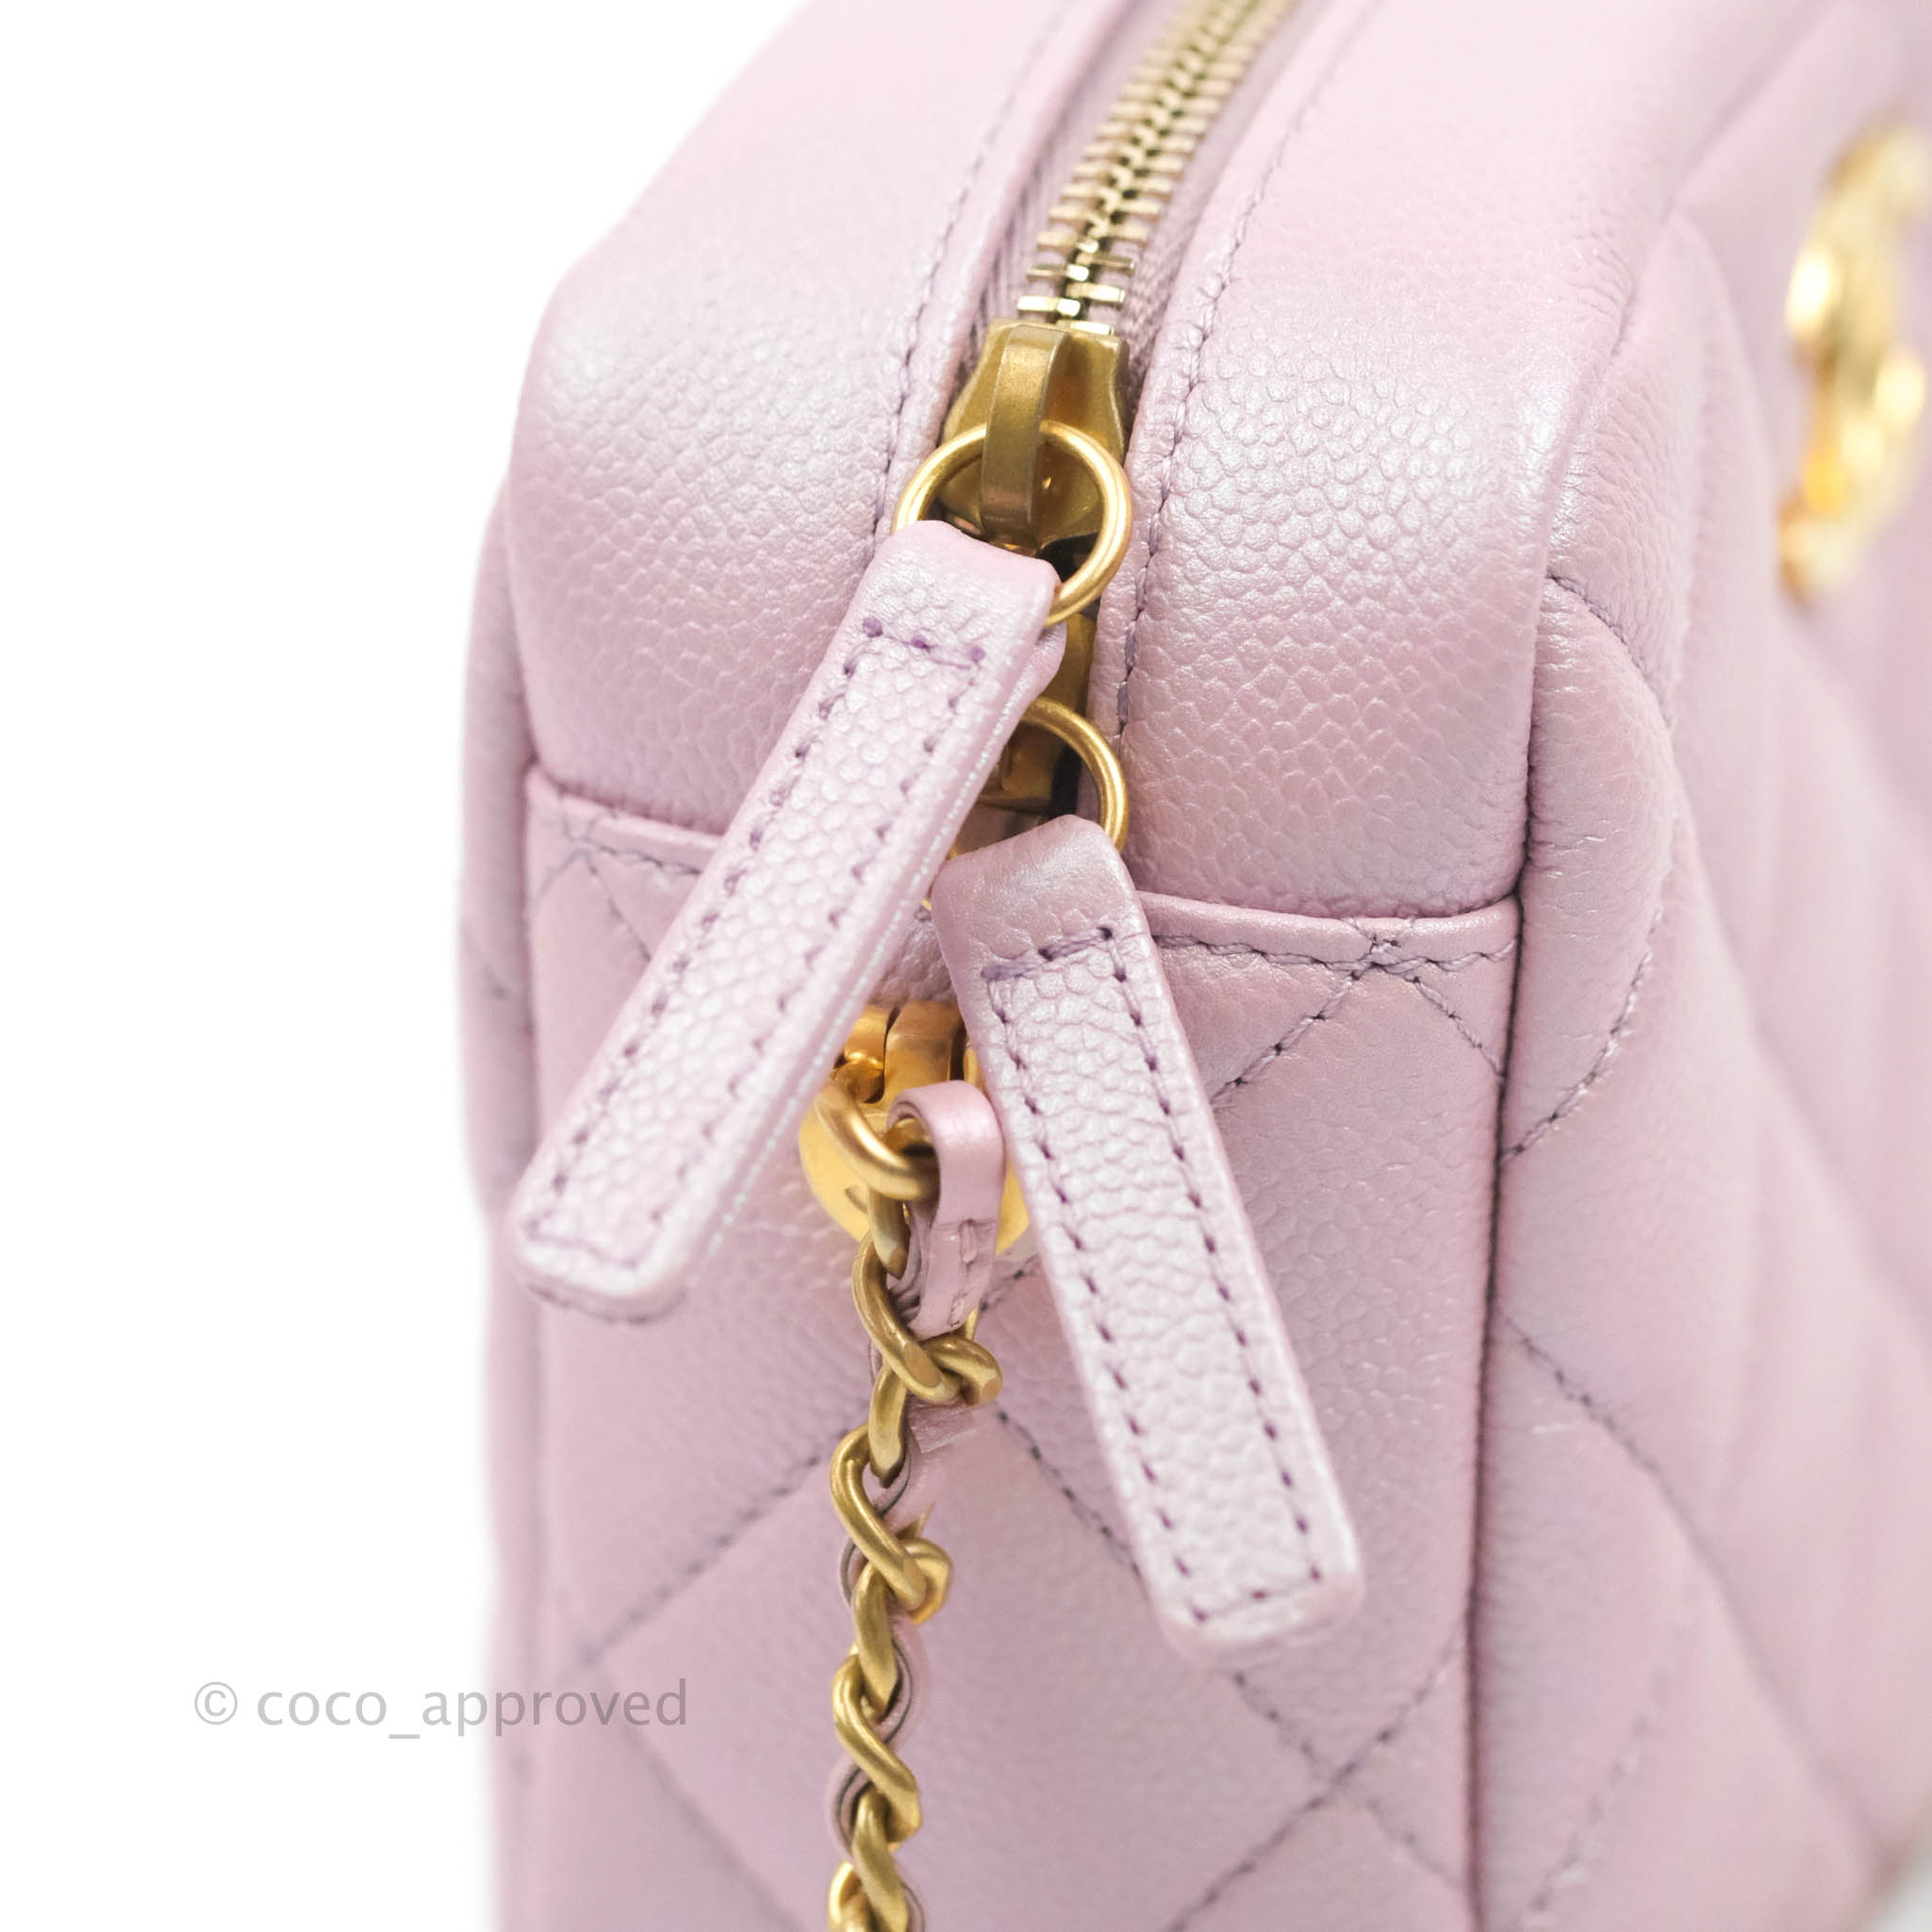 Chanel Quilted My Perfect Camera Case Iridescent Pink Caviar Aged